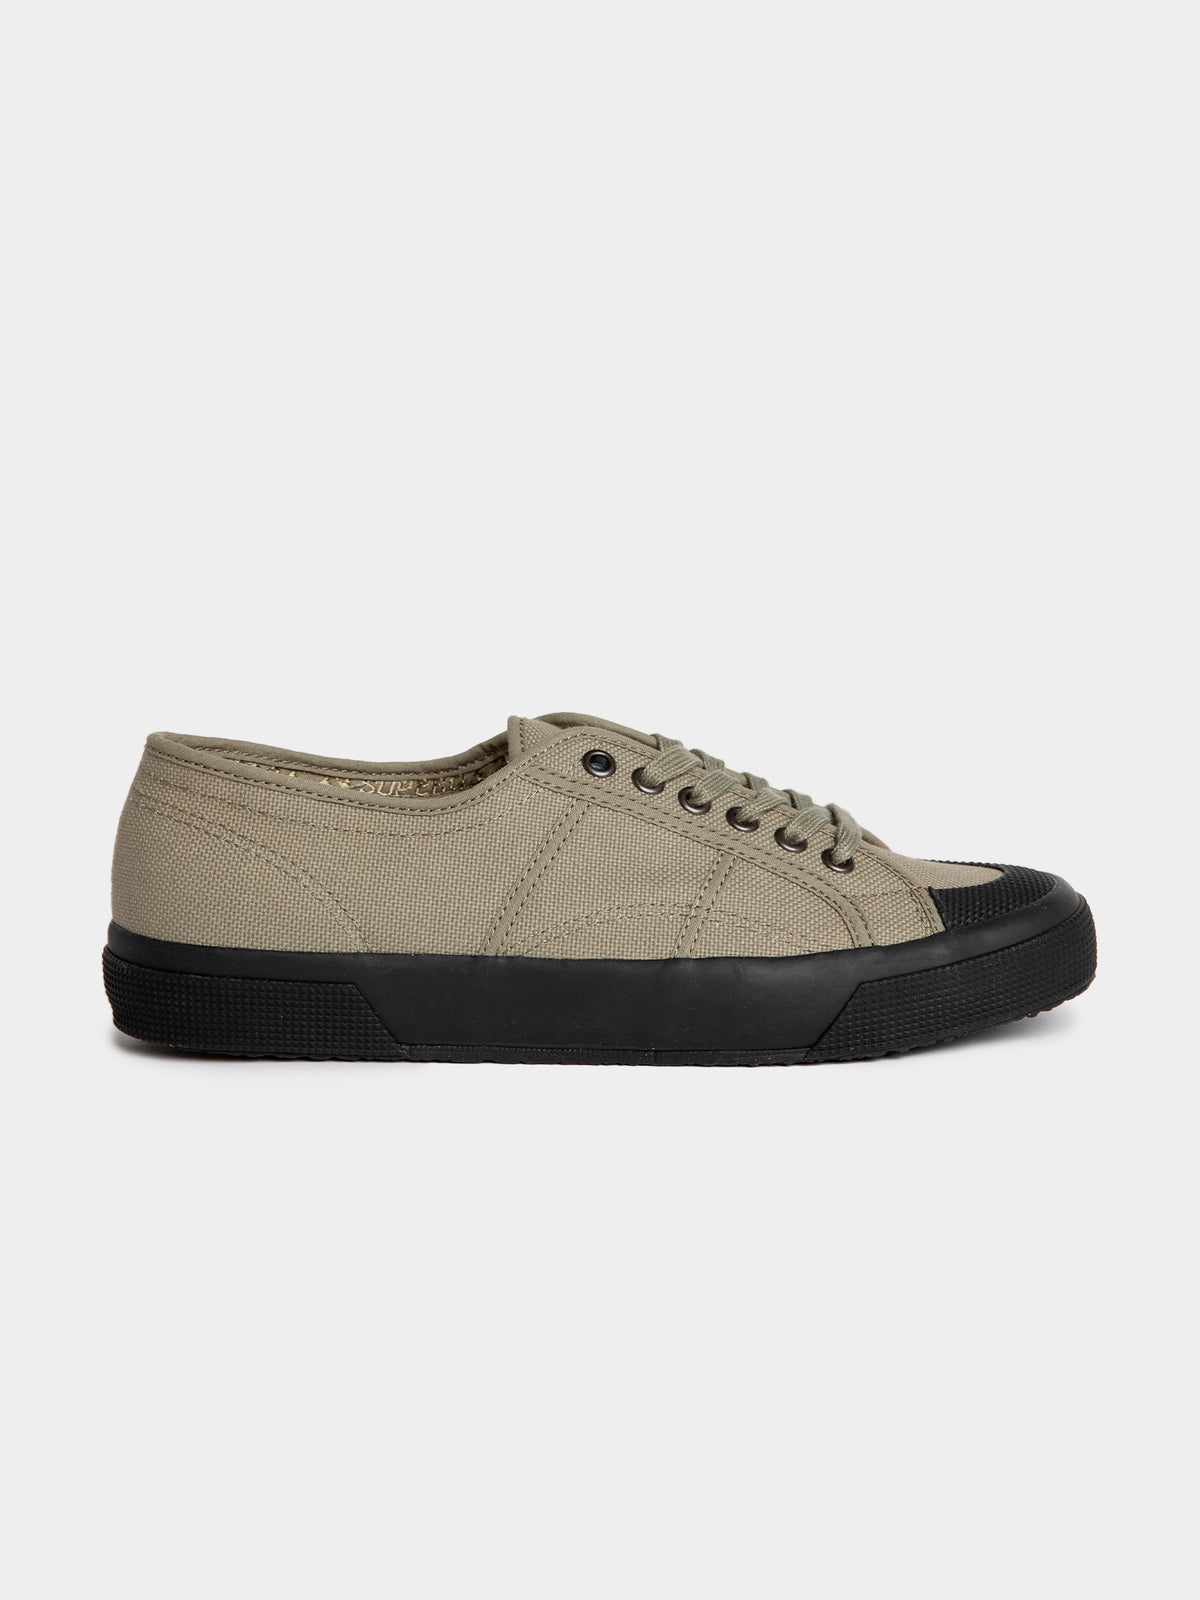 Unisex 2390 Military Sneakers in Brown Military Green